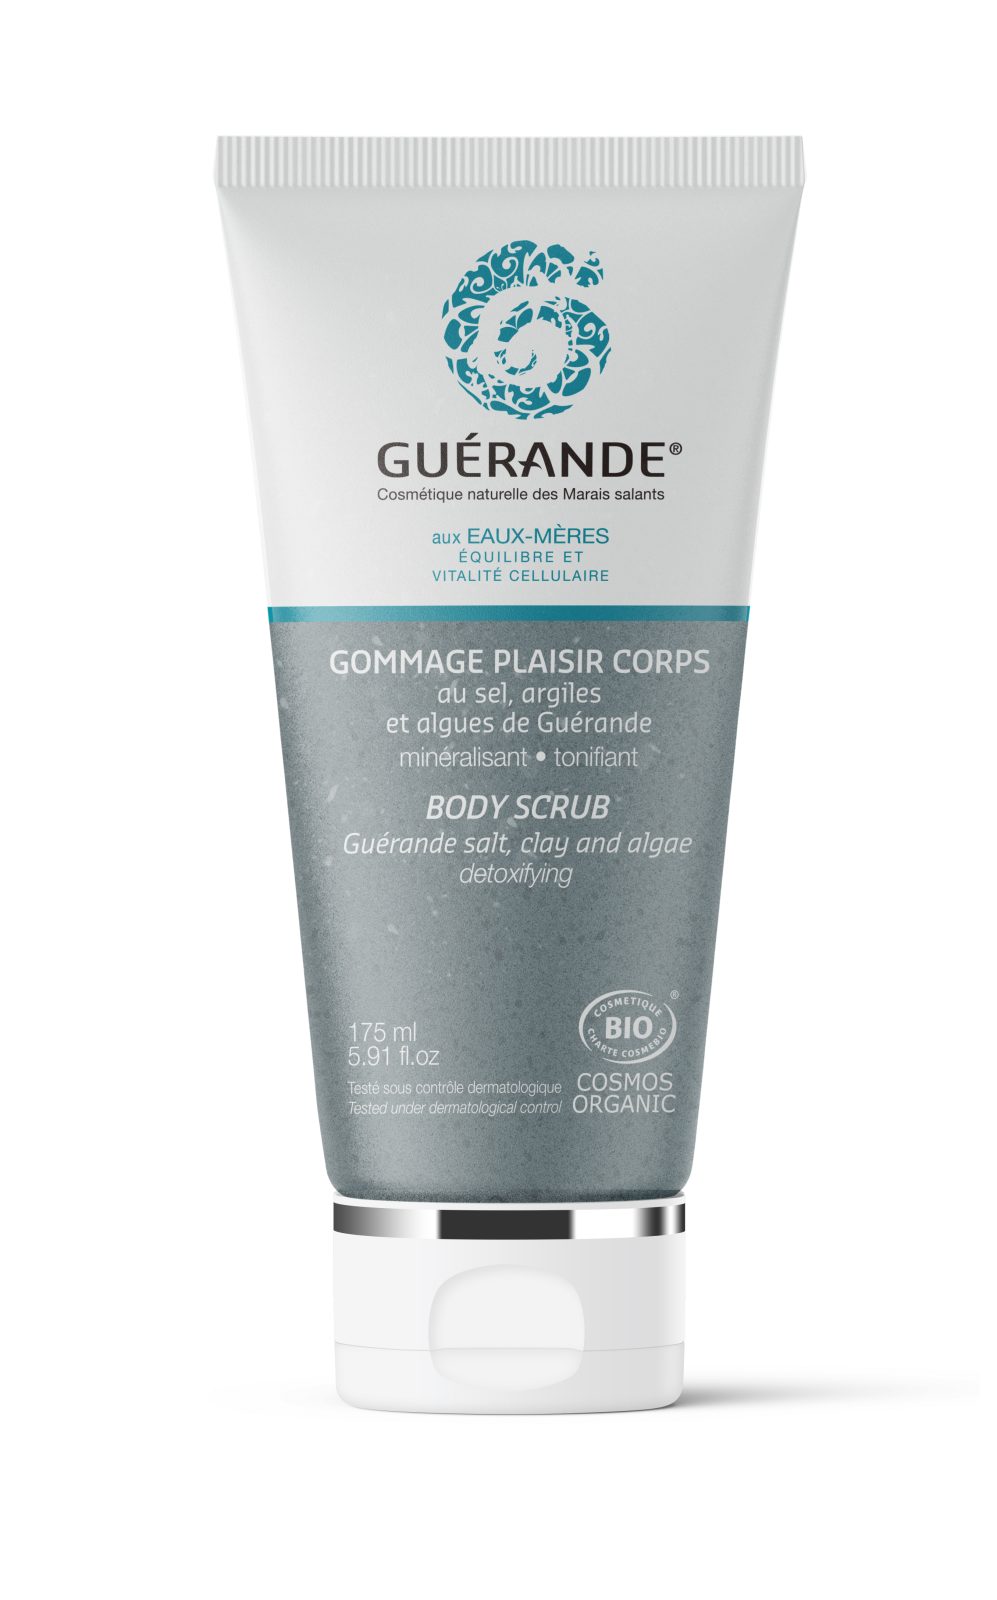 GUERANDE gommage corps 175ml